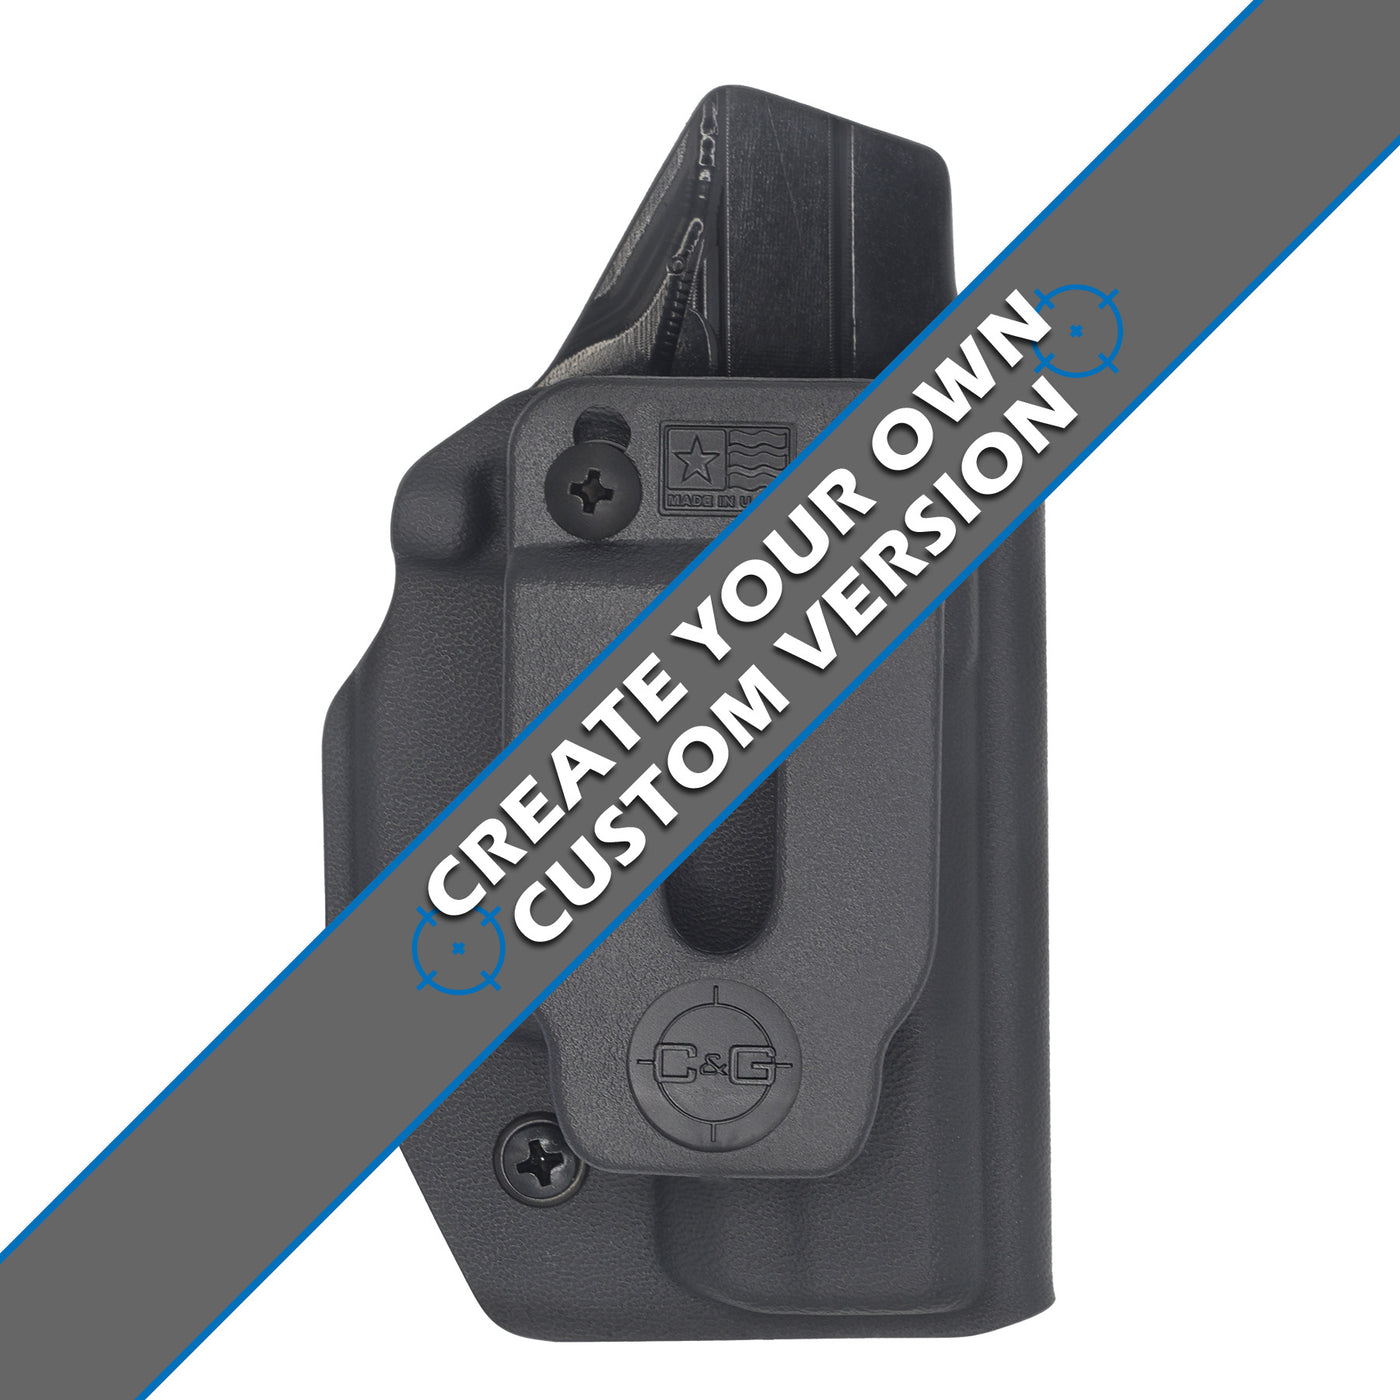 This is the custom C&G Holsters custom Covert IWB kydex holster for LCPII LCP2.